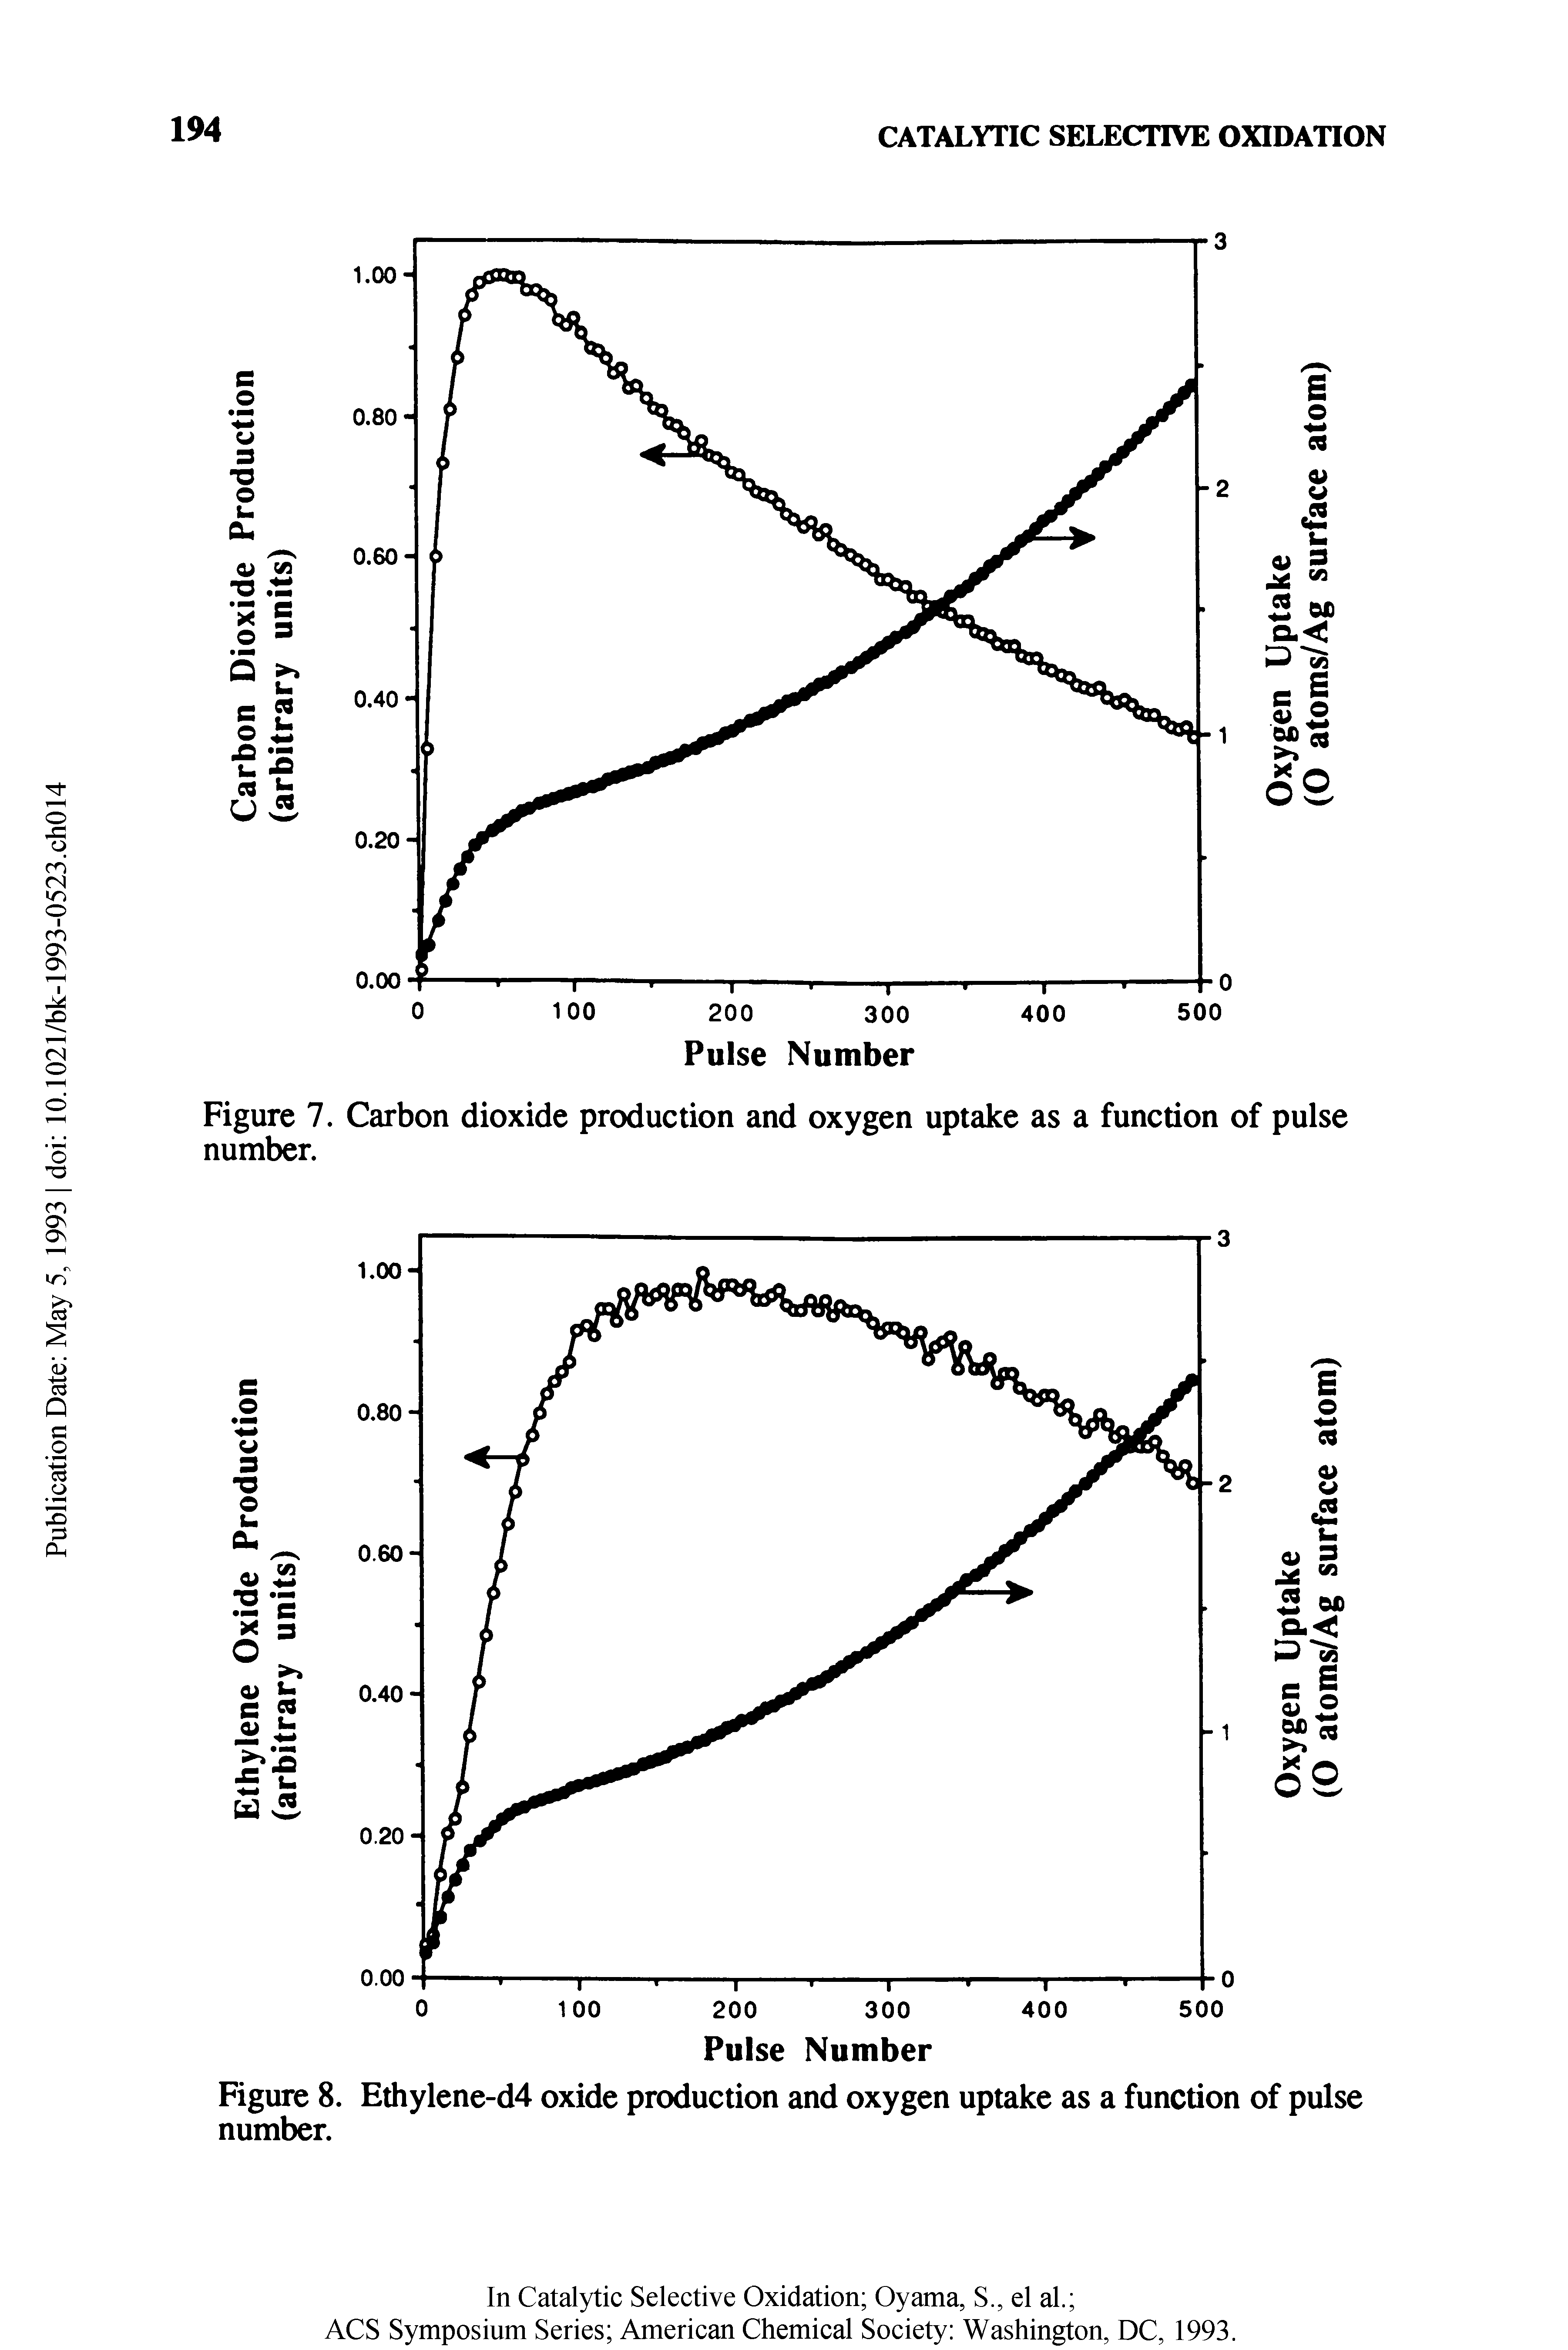 Figure 8. Ethylene-d4 oxide production and oxygen uptake as a function of pulse number.